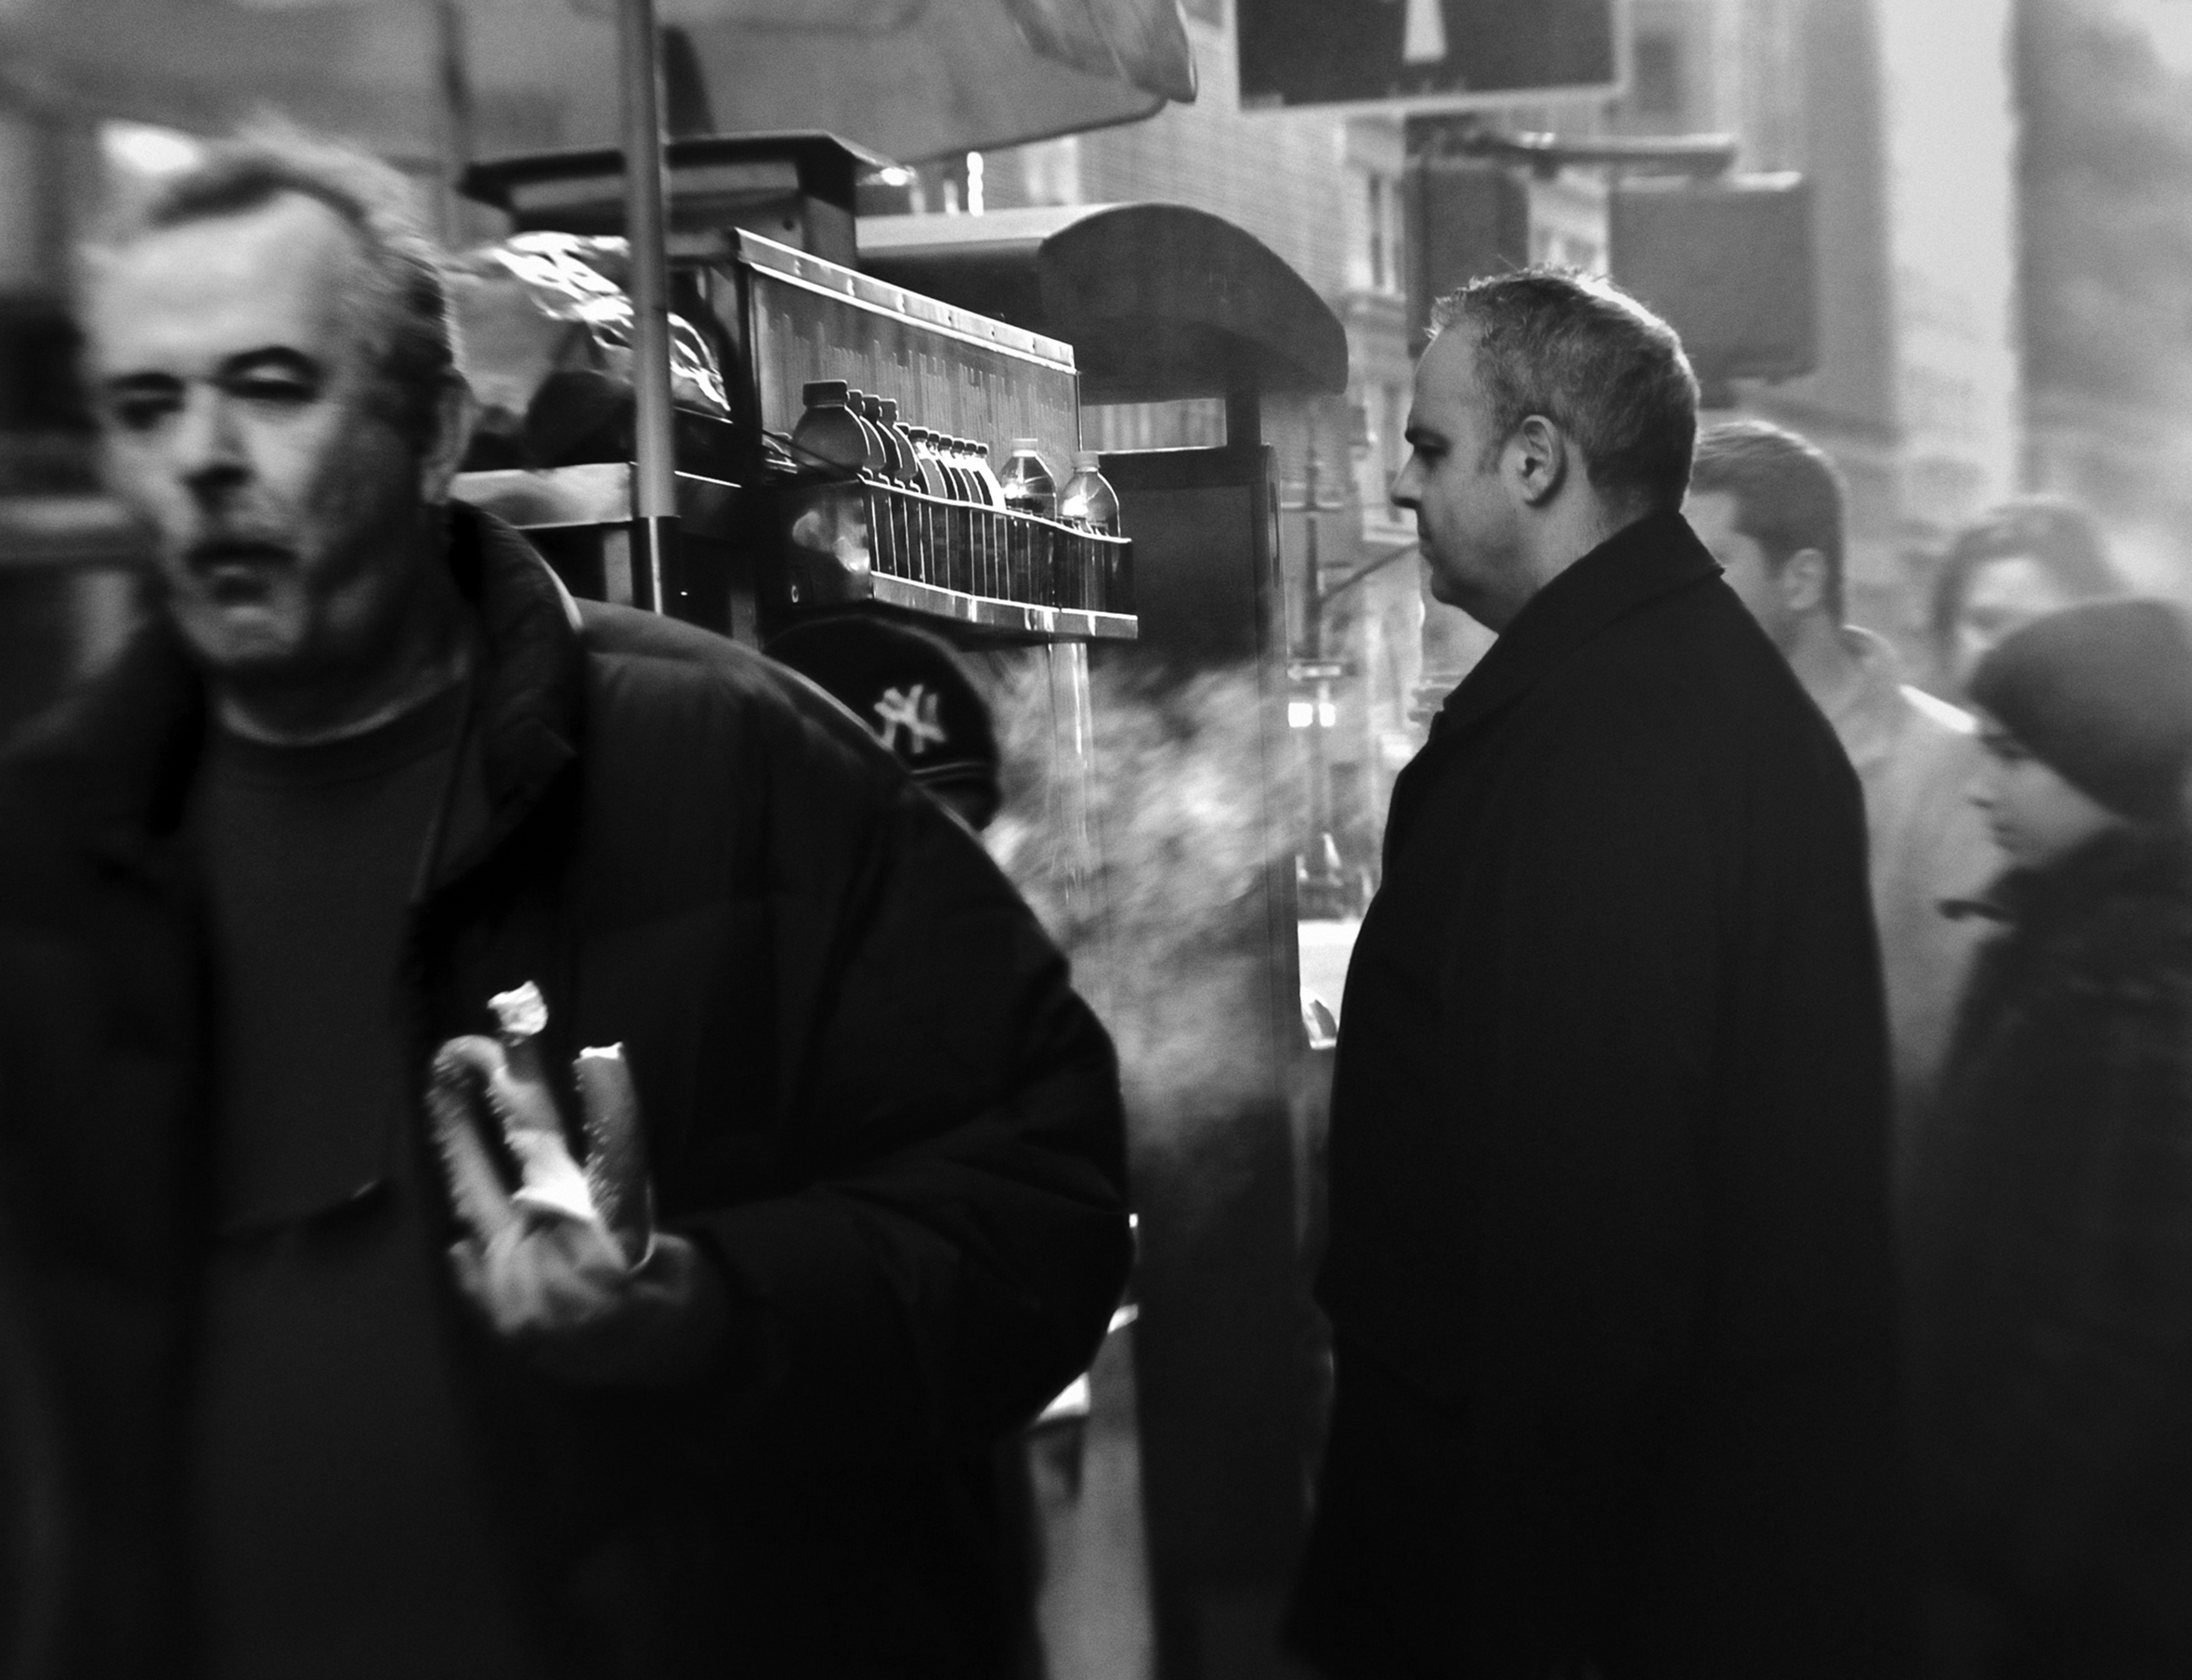 A line of men wait at a pretzel cart in a city. A man walks away from the cart toward the camera with a soft pretzel in his left hand. The men are in coats and there is steam in the air.